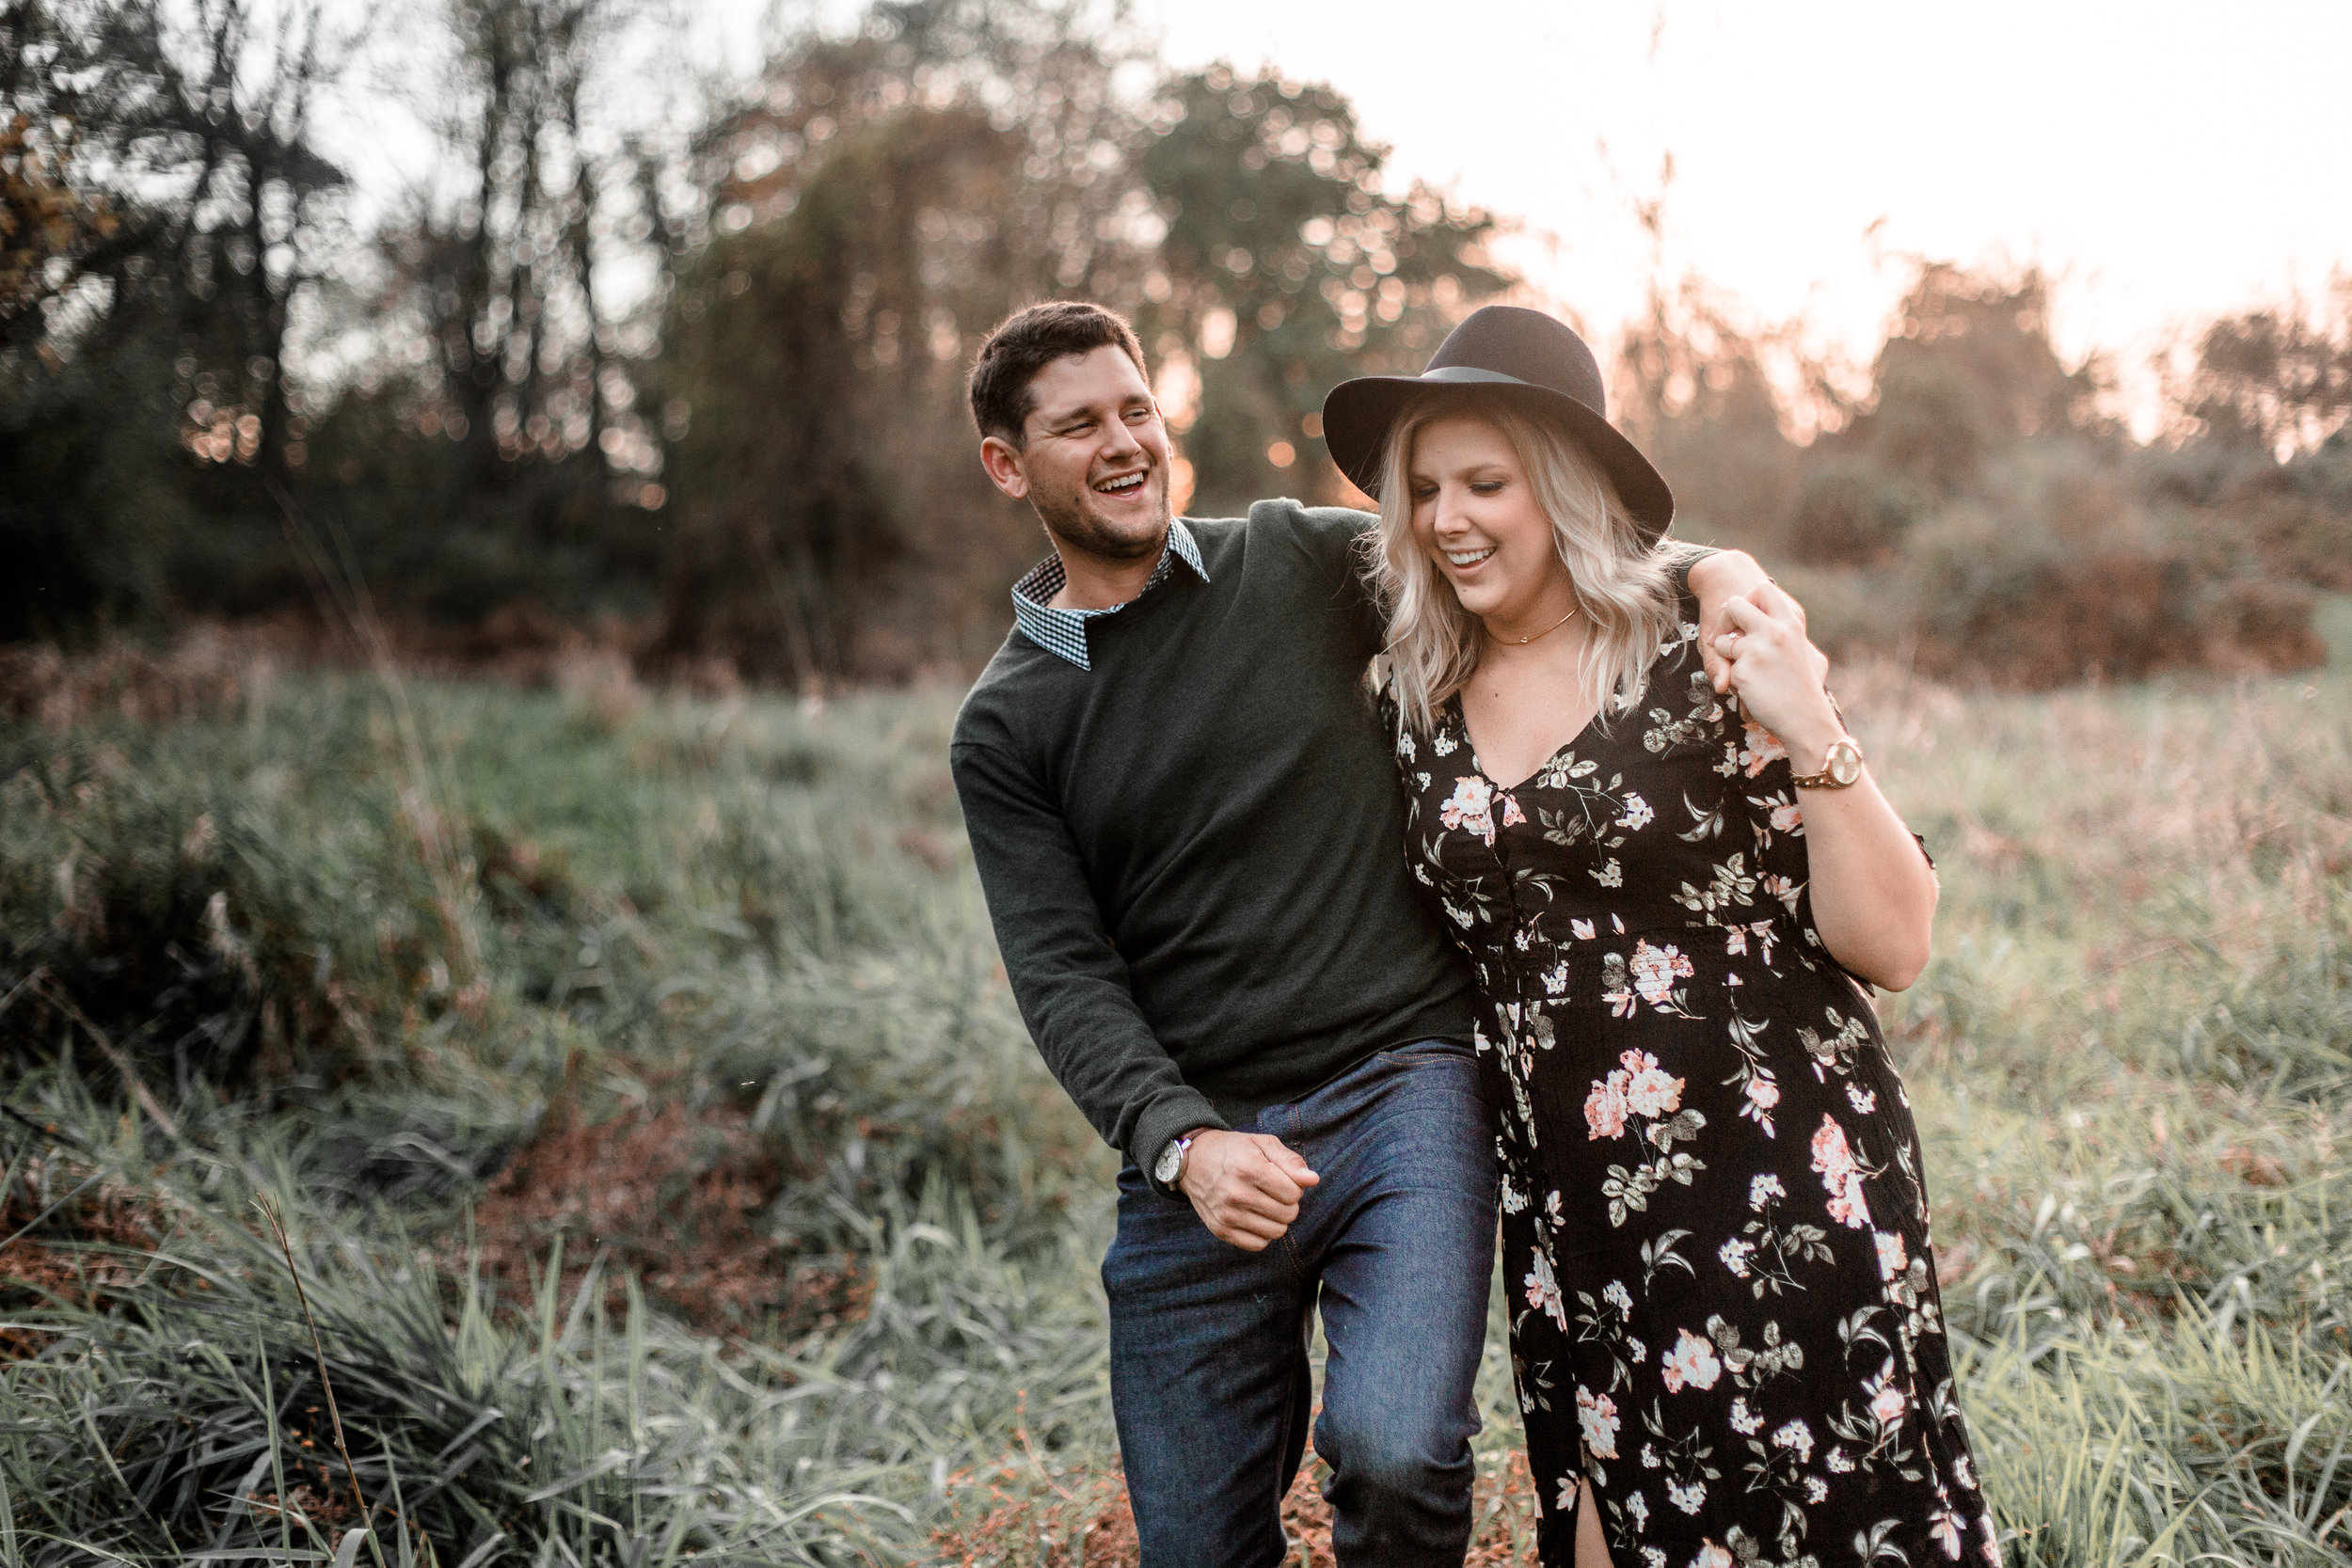 nicole-daacke-photography-carefree-bohemian-lancaster-pa-pennsylvania-engagement-photos-engagement-session-golden-sunset-adventure-session-in-lancaster-pa-lancaster-pa-outdoor-wedding-photographer-30.jpg